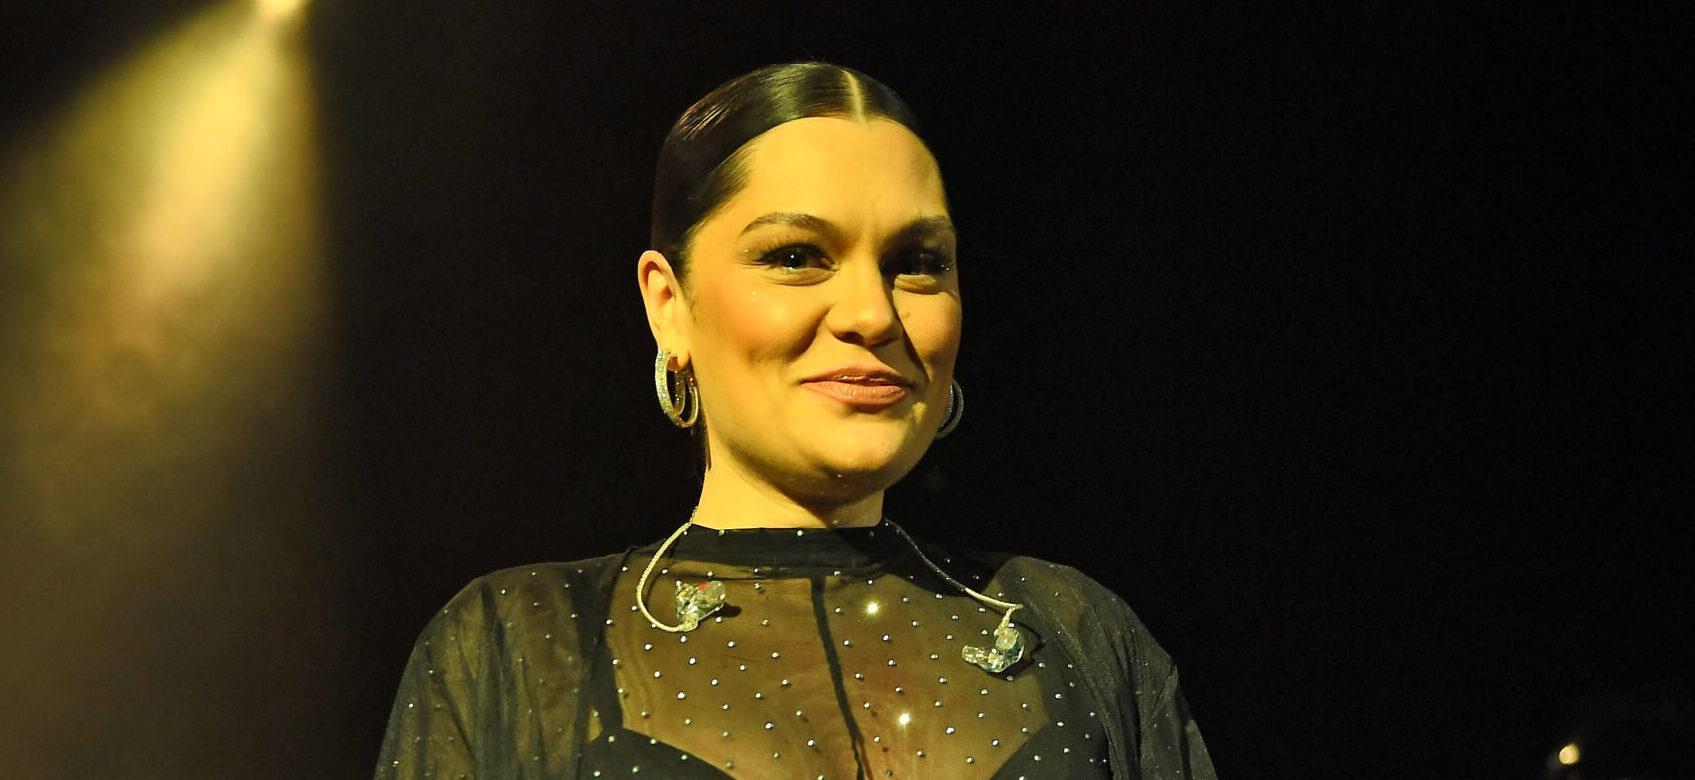 Jessie J’s Hit Song ‘Price Tag’ Has THIS Heartwarming Connection With Her Motherhood Journey